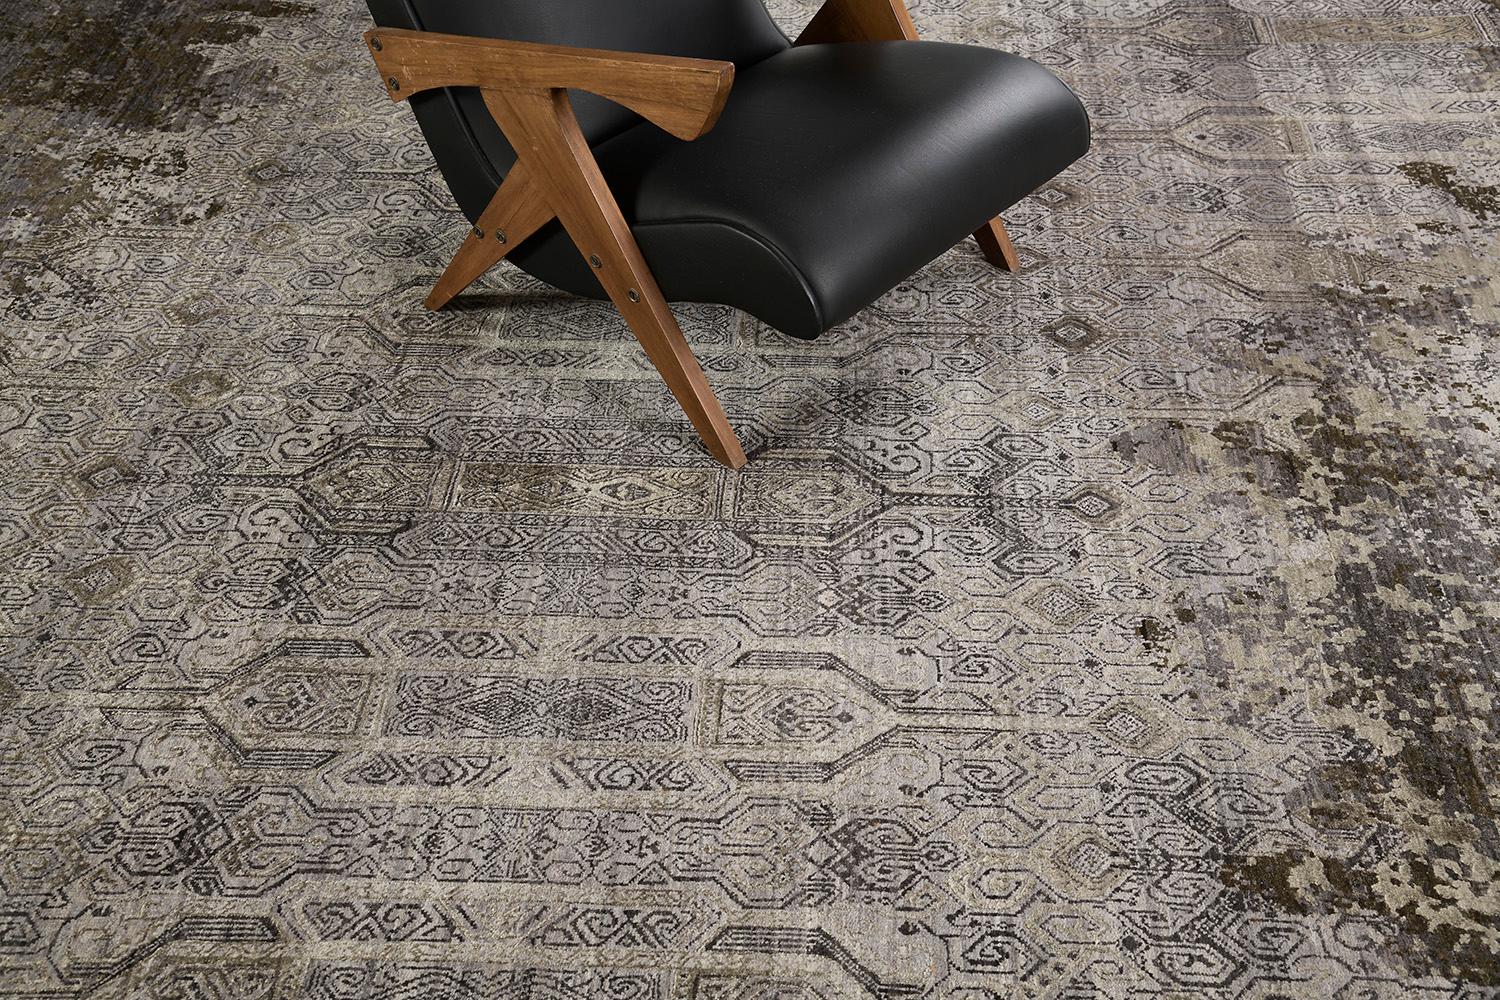 With its fascinating neutral colour scheme and weathered beauty, Sofia' creates this warm ambiance of elegance and tranquility. The abrashed taupe field features dominant elements of Ram's horn representing power, heroism and fertility. A sanctuary